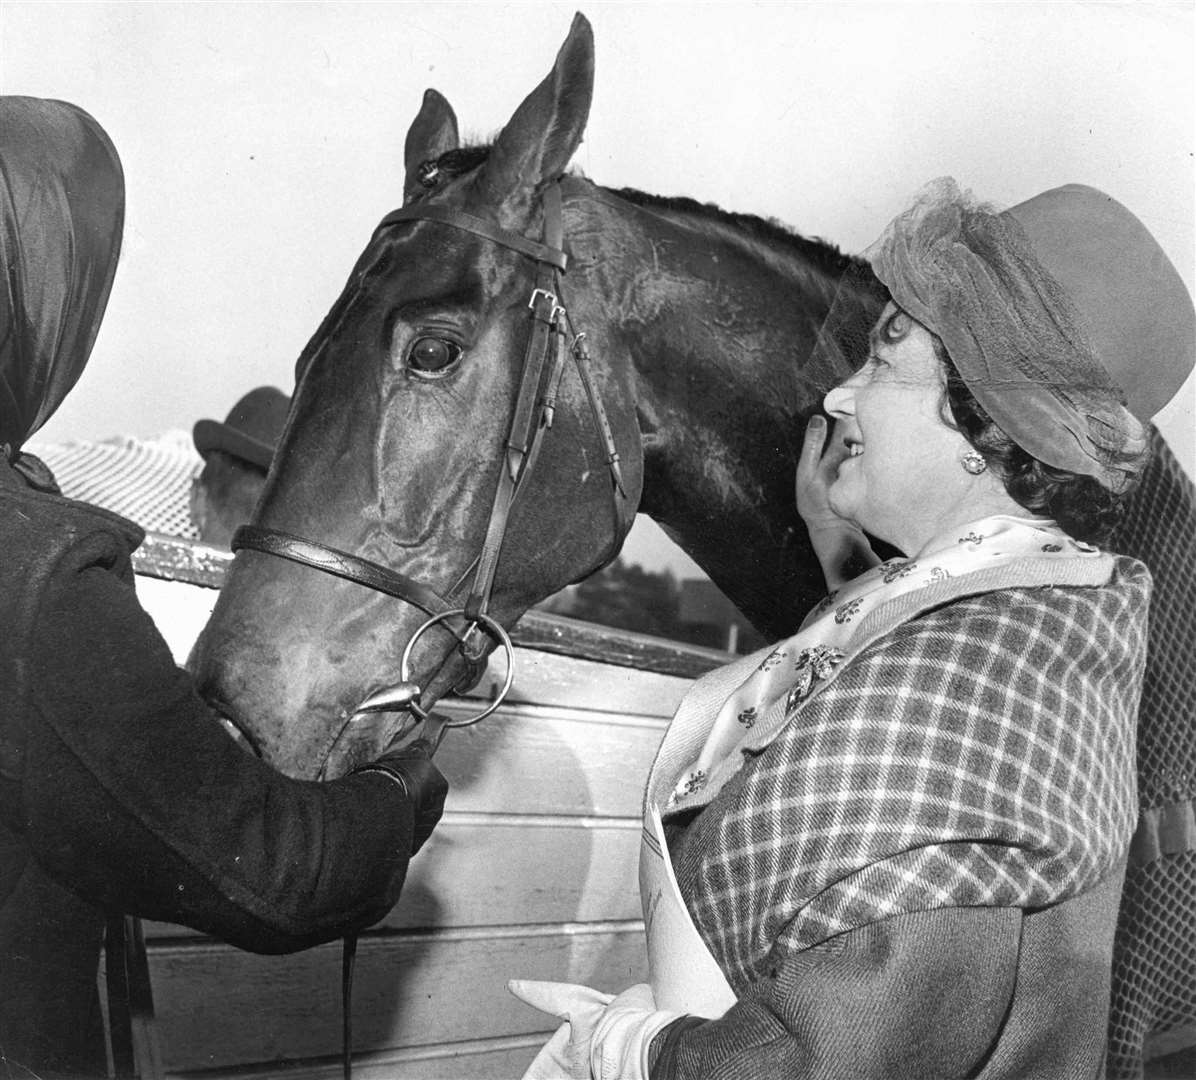 November 1964: The Queen Mother, who has had a lifelong interest in horse racing, paid a number of visits to Folkestone. She made a surprise visit to a National Hunt meeting at which her horse Arch Point, ridden by Bill Rees, won the opening race, the Marden Hurdle. 'Gay Record' made it a double triumph for his Royal owner when he won the Canterbury Chase, ridden by Bobby Beasley. "I've had a wonderful afternoon" the Queen Mother said